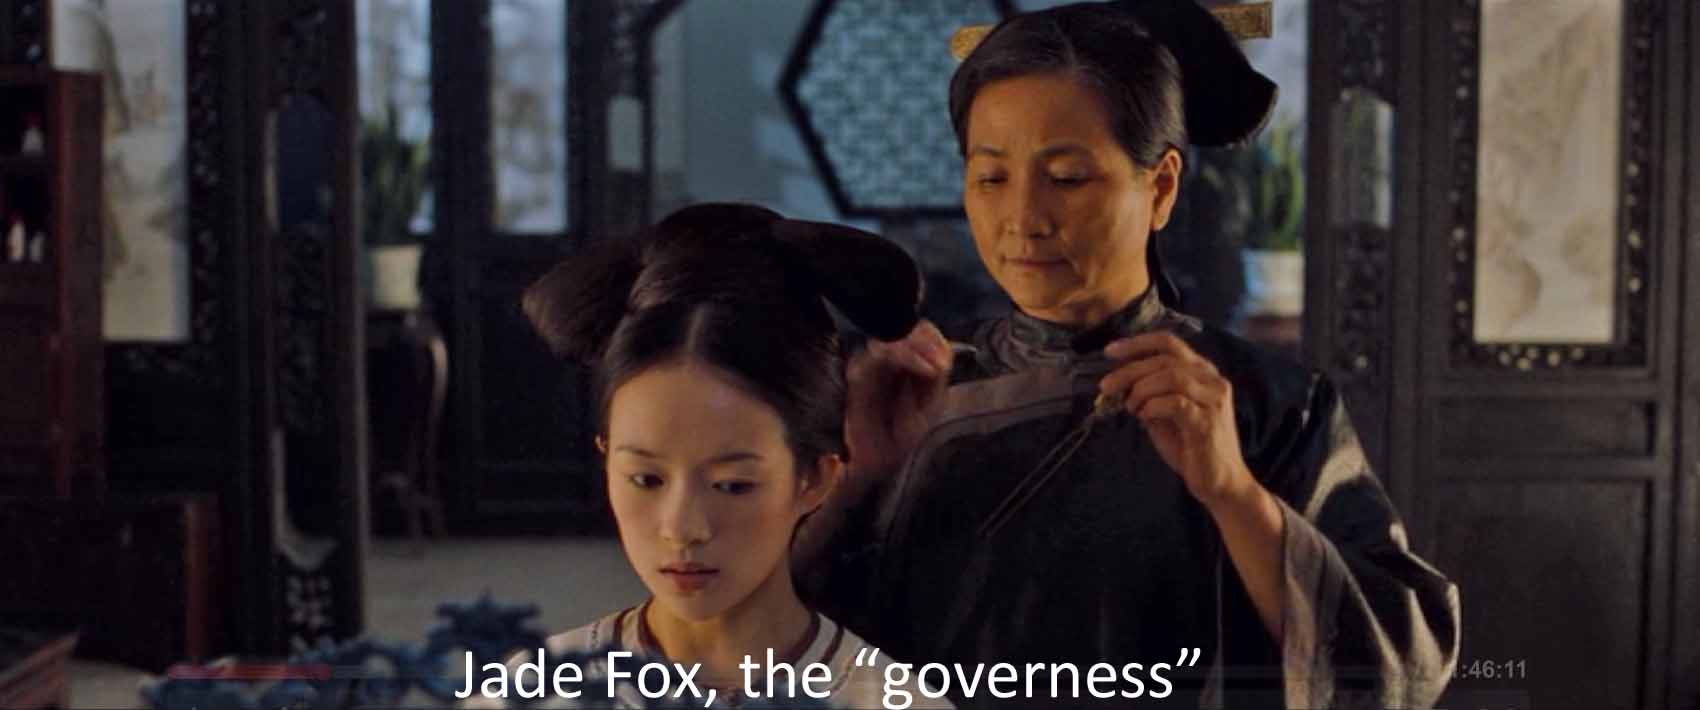 Jade Fox, the governess